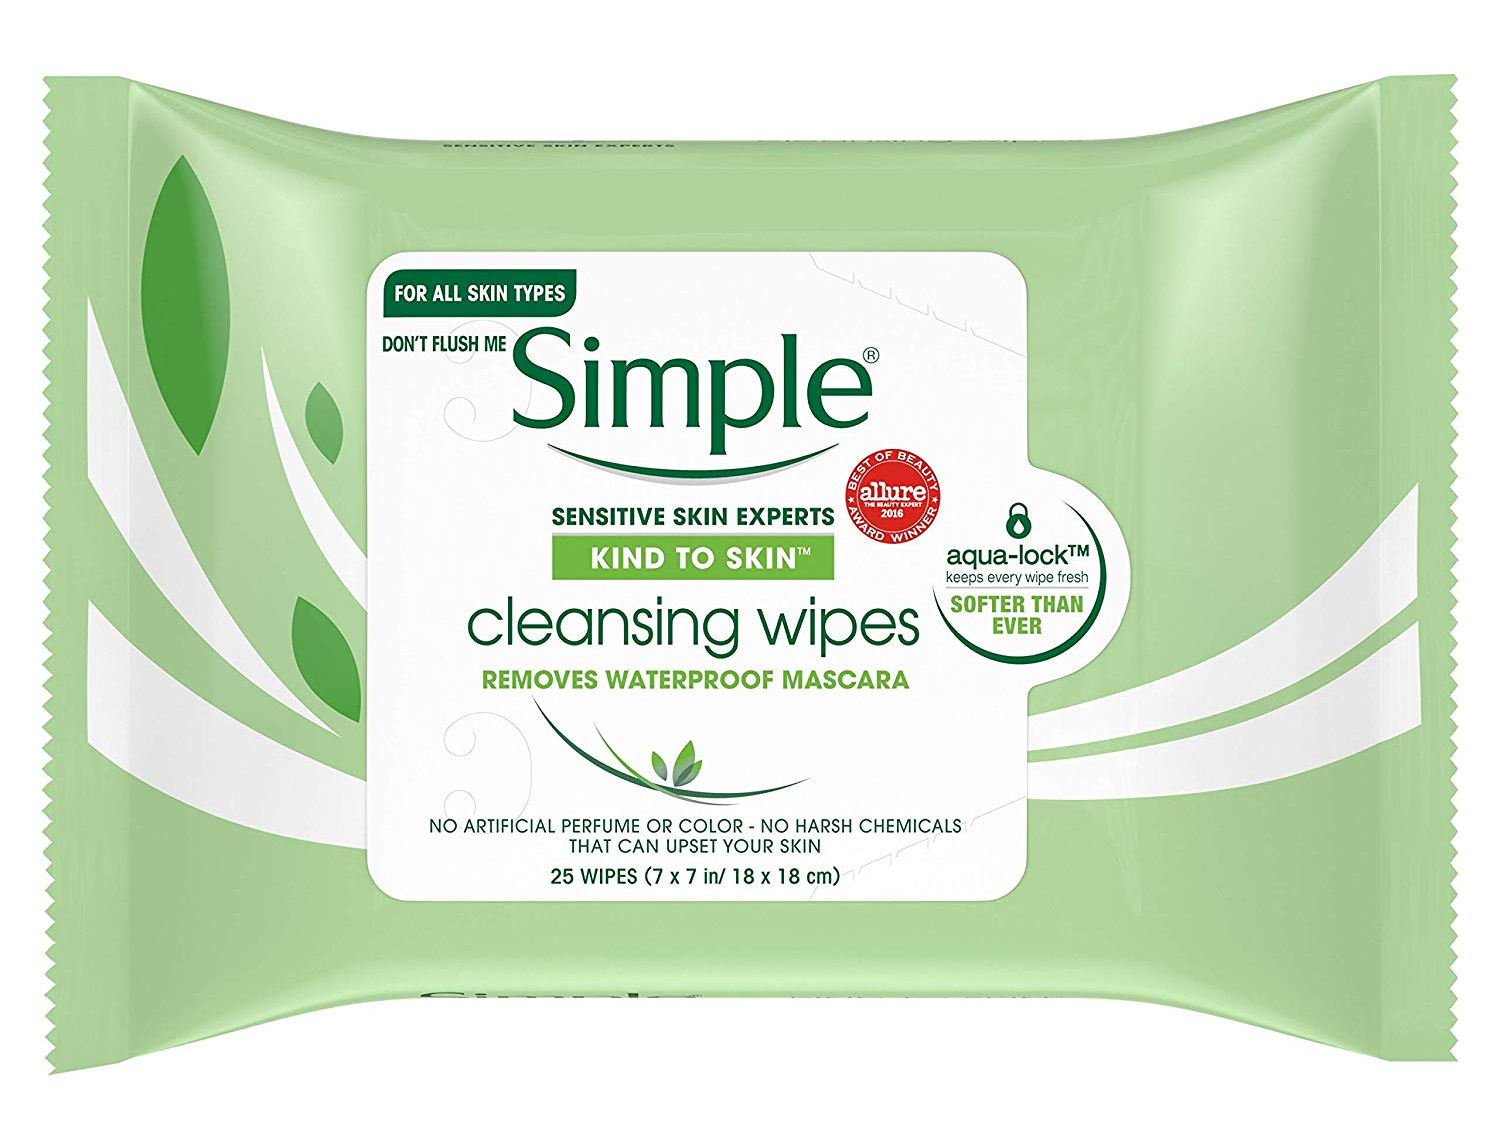 Simply cleaning. Simple sensitive Skin Experts. Simple wipes. Wipe a face. Cleaning wipes.